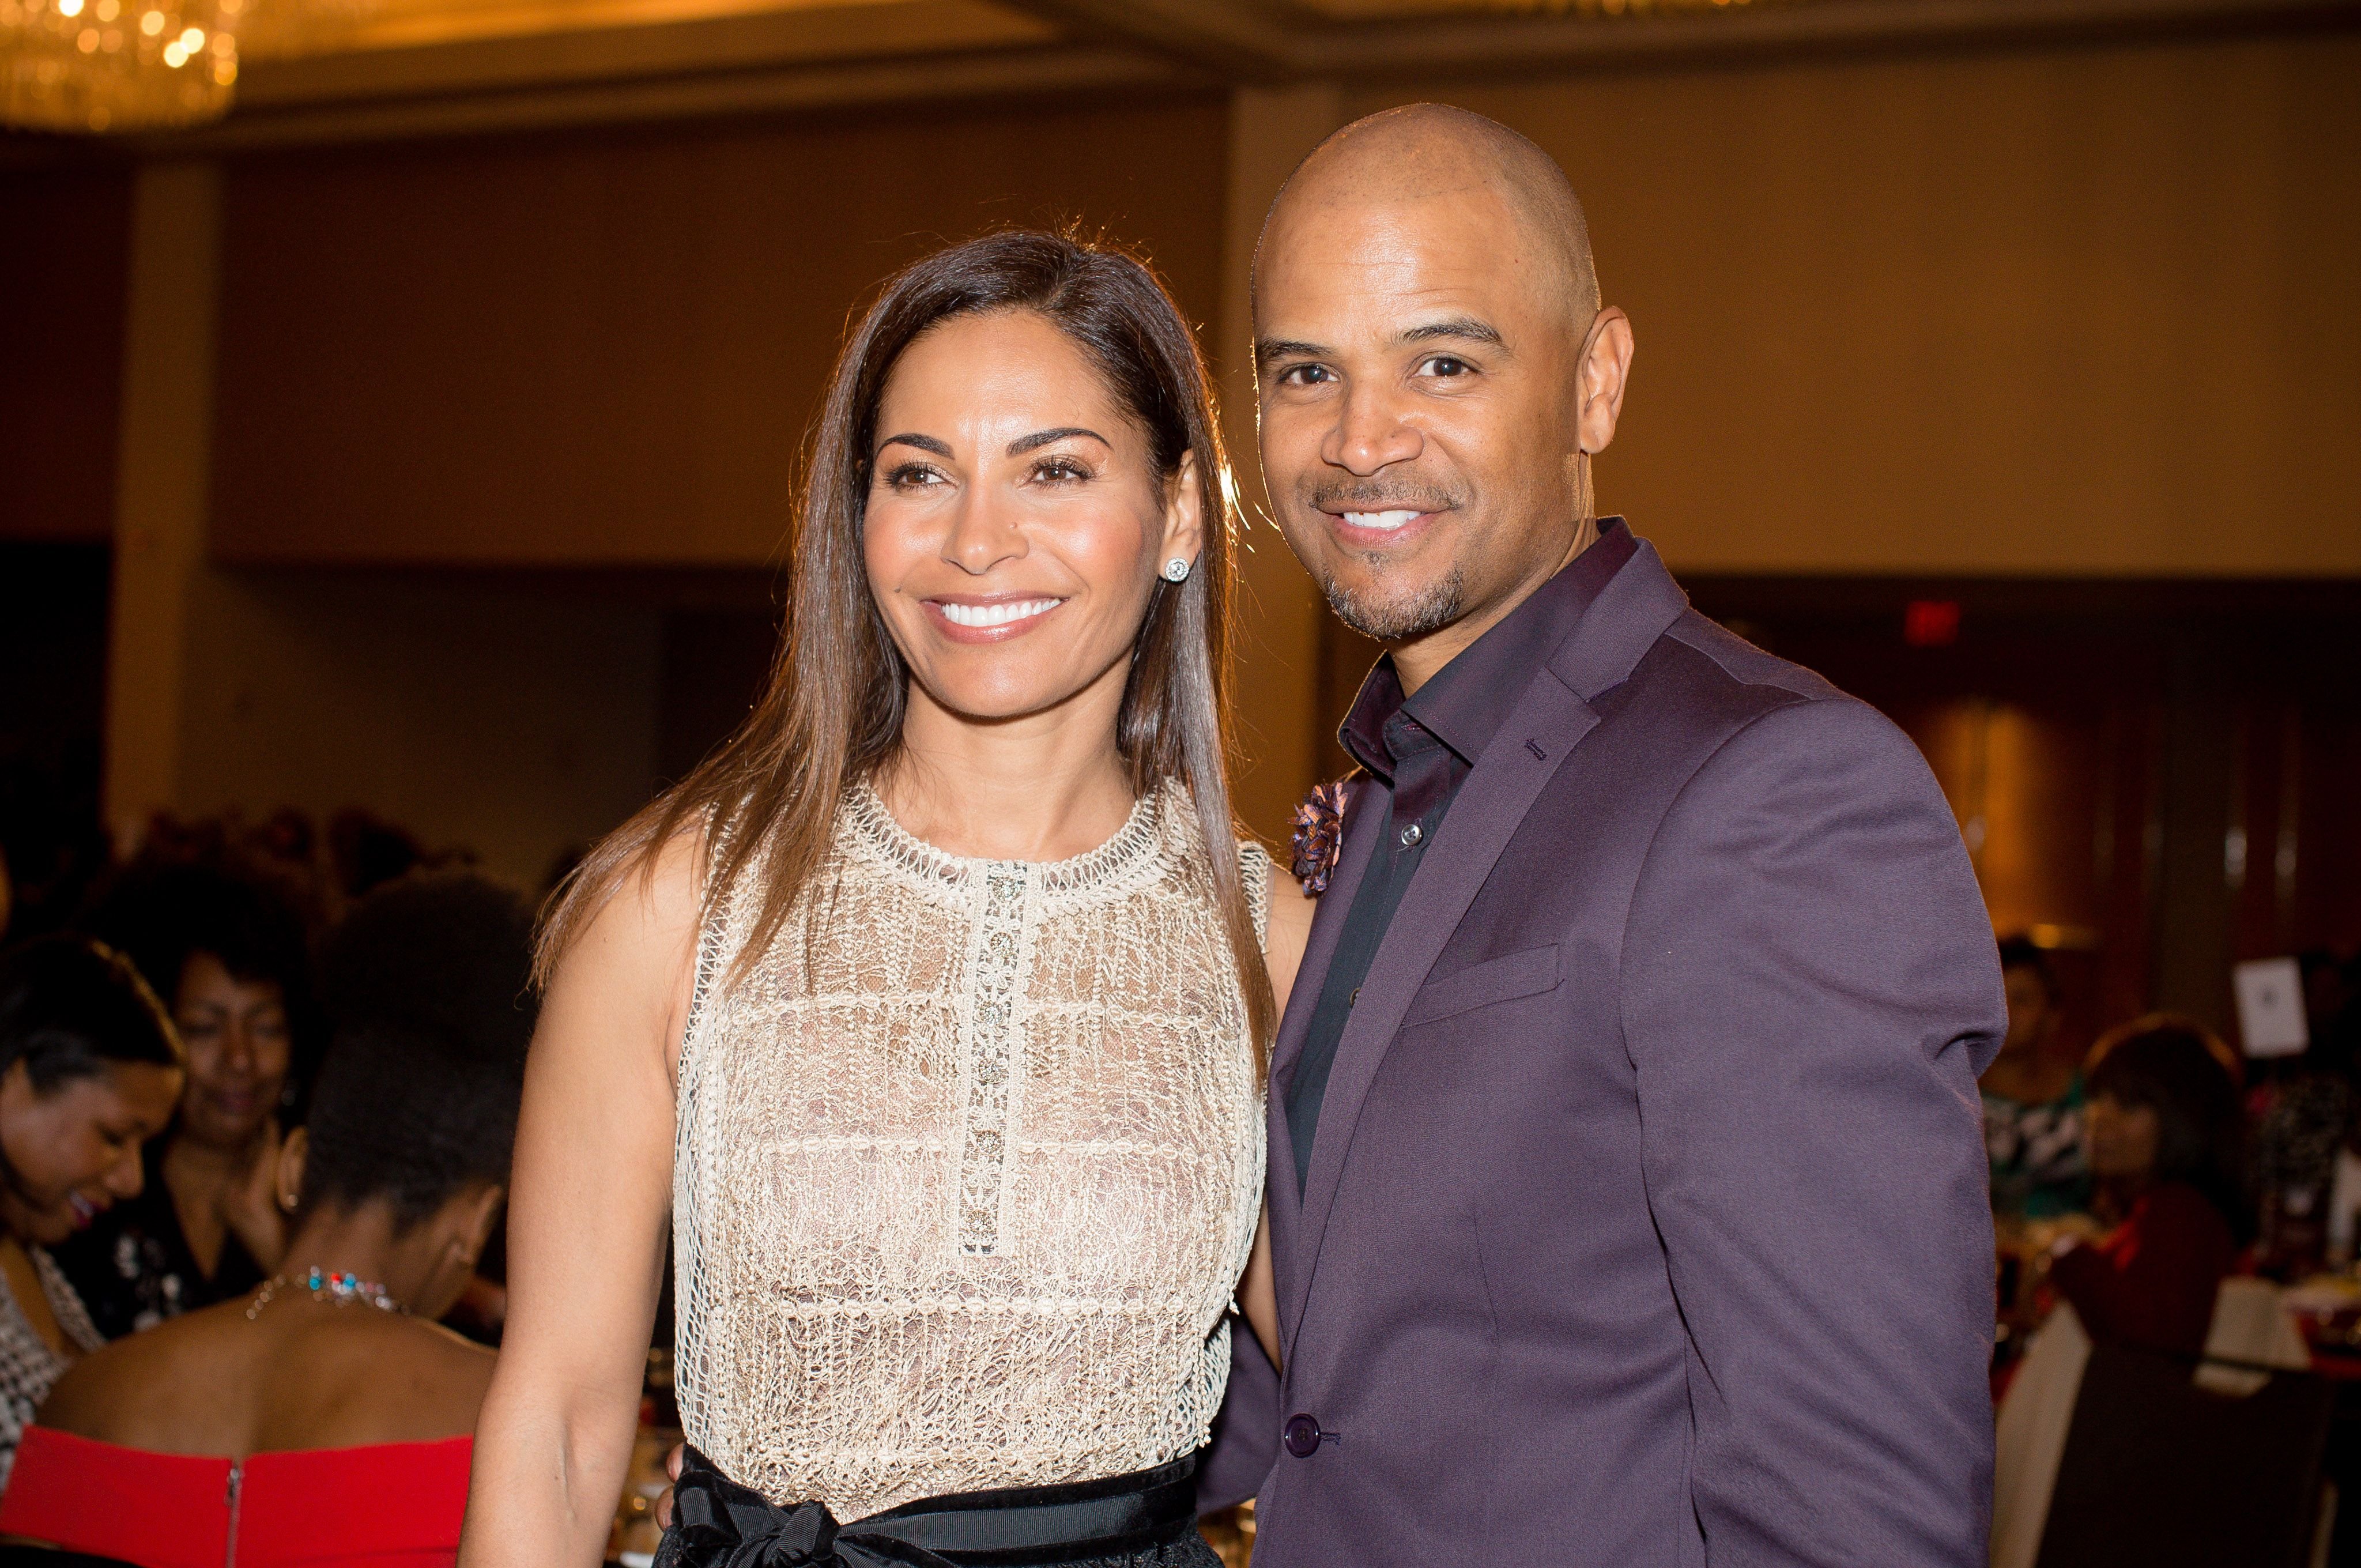 Salli Richardson Whitfield and husband, Dondre Whitfield at the 2017 Black Women Film Summit Awards luncheon at the Atlanta Marriott Marquis on March 3, 2017. | Photo: Getty Images